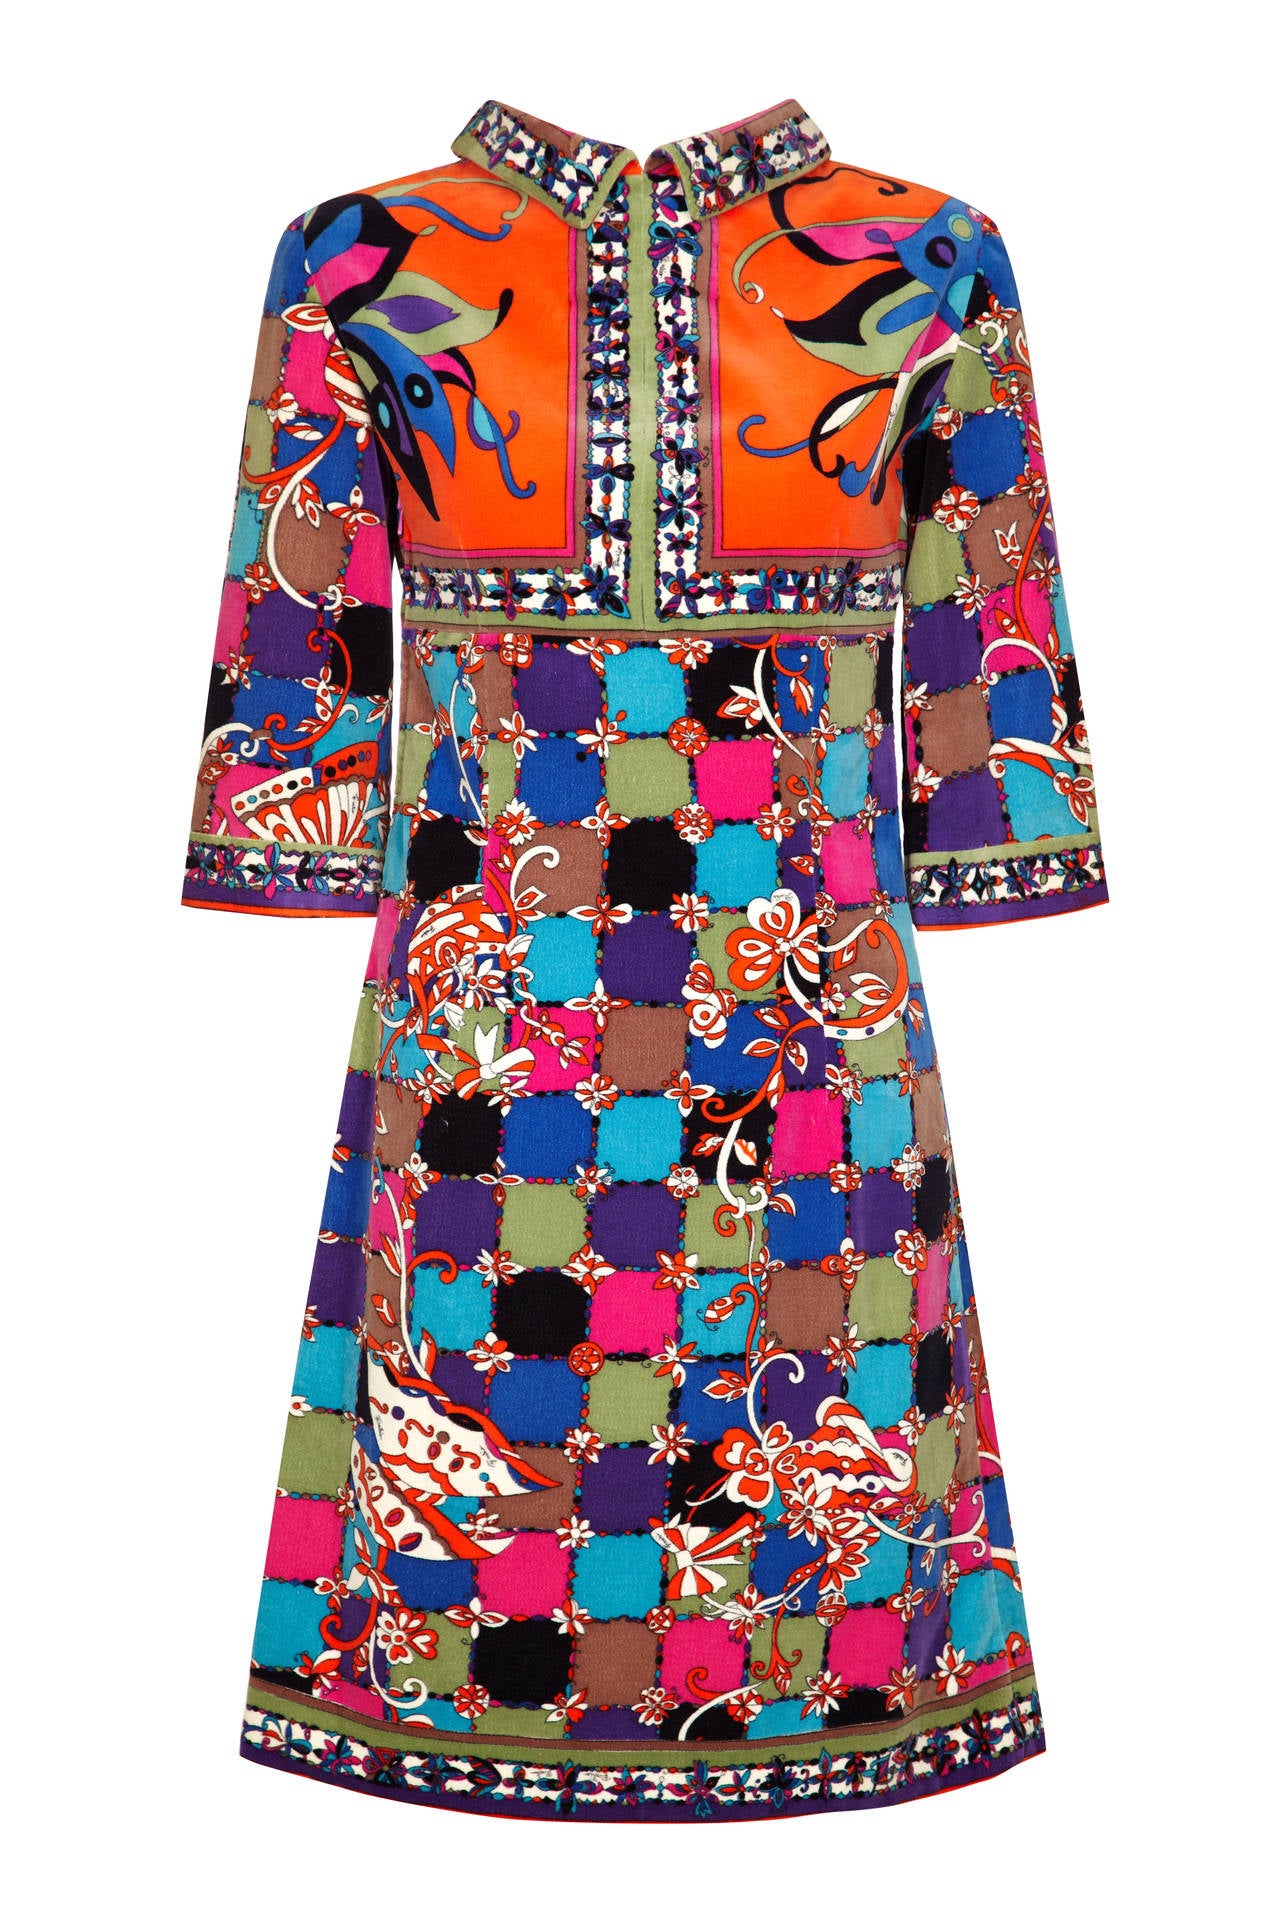 Amazing original 1960s velvet tunic dress by Emilio Pucci with empire line, ¾ sleeves and exceptional print.  This A-line dress features a zip from the collar to the empire line which can be worn open or closed and it fastens with another zip at the